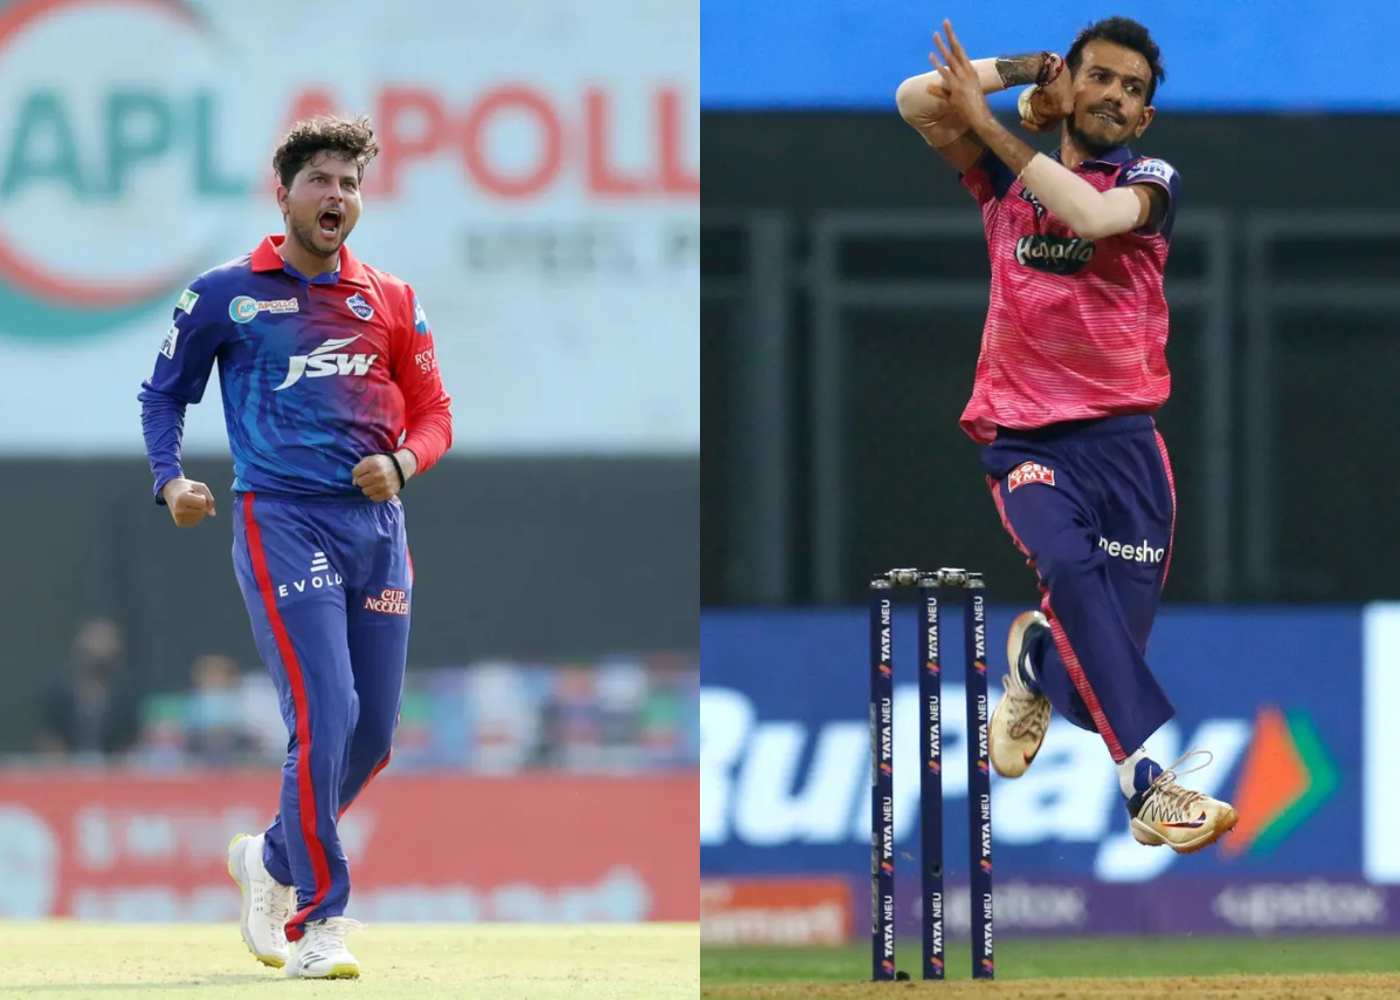 Akash Chopra is doubtful that Kuldeep and Chahal will play T20 WC together | Courtesy: BCCI-IPL